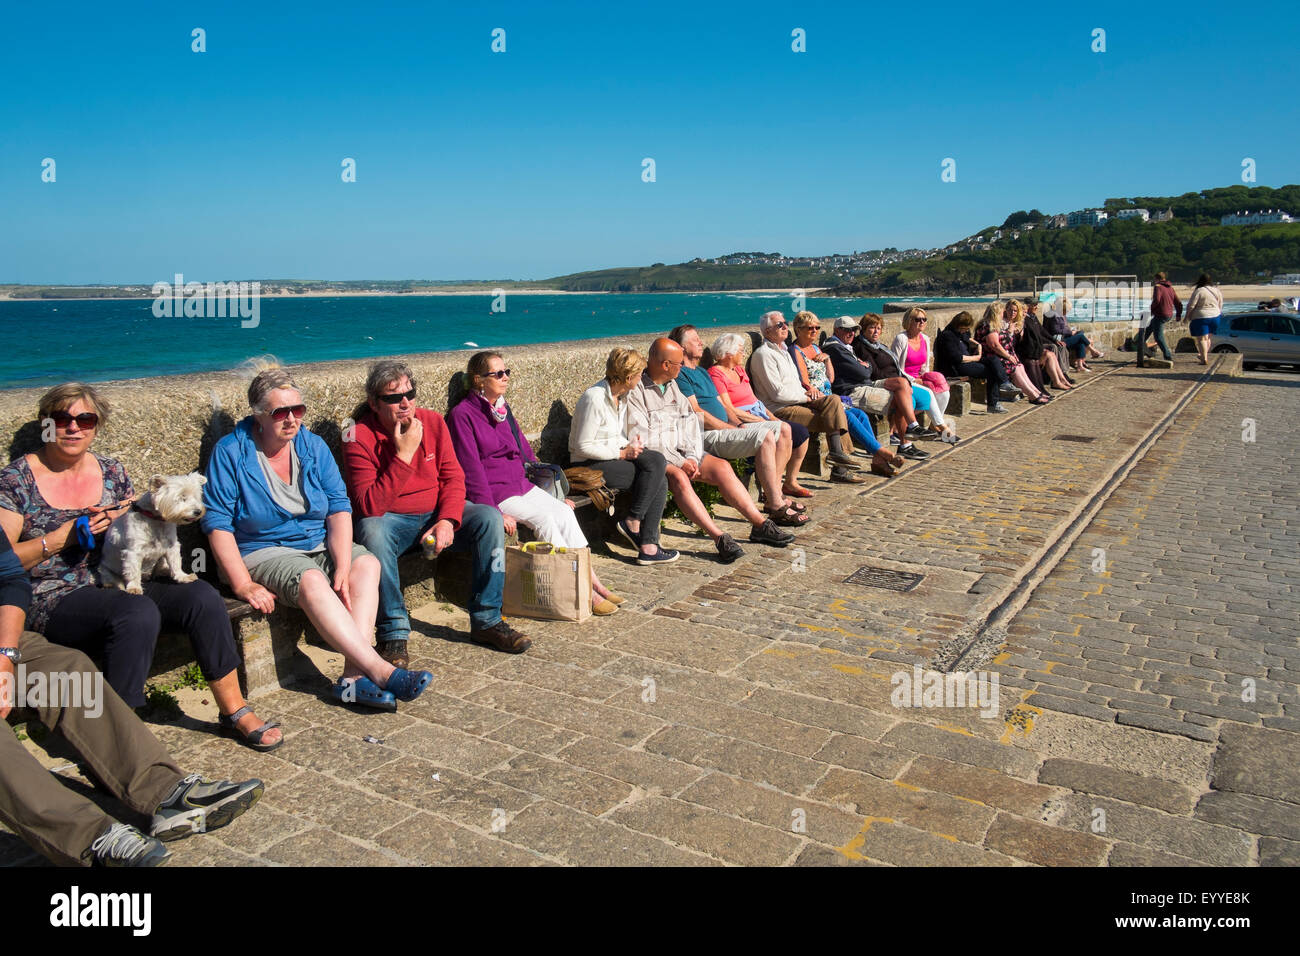 People sunbathing on the harbour wall at St Ives, Cornwall, England, UK Stock Photo